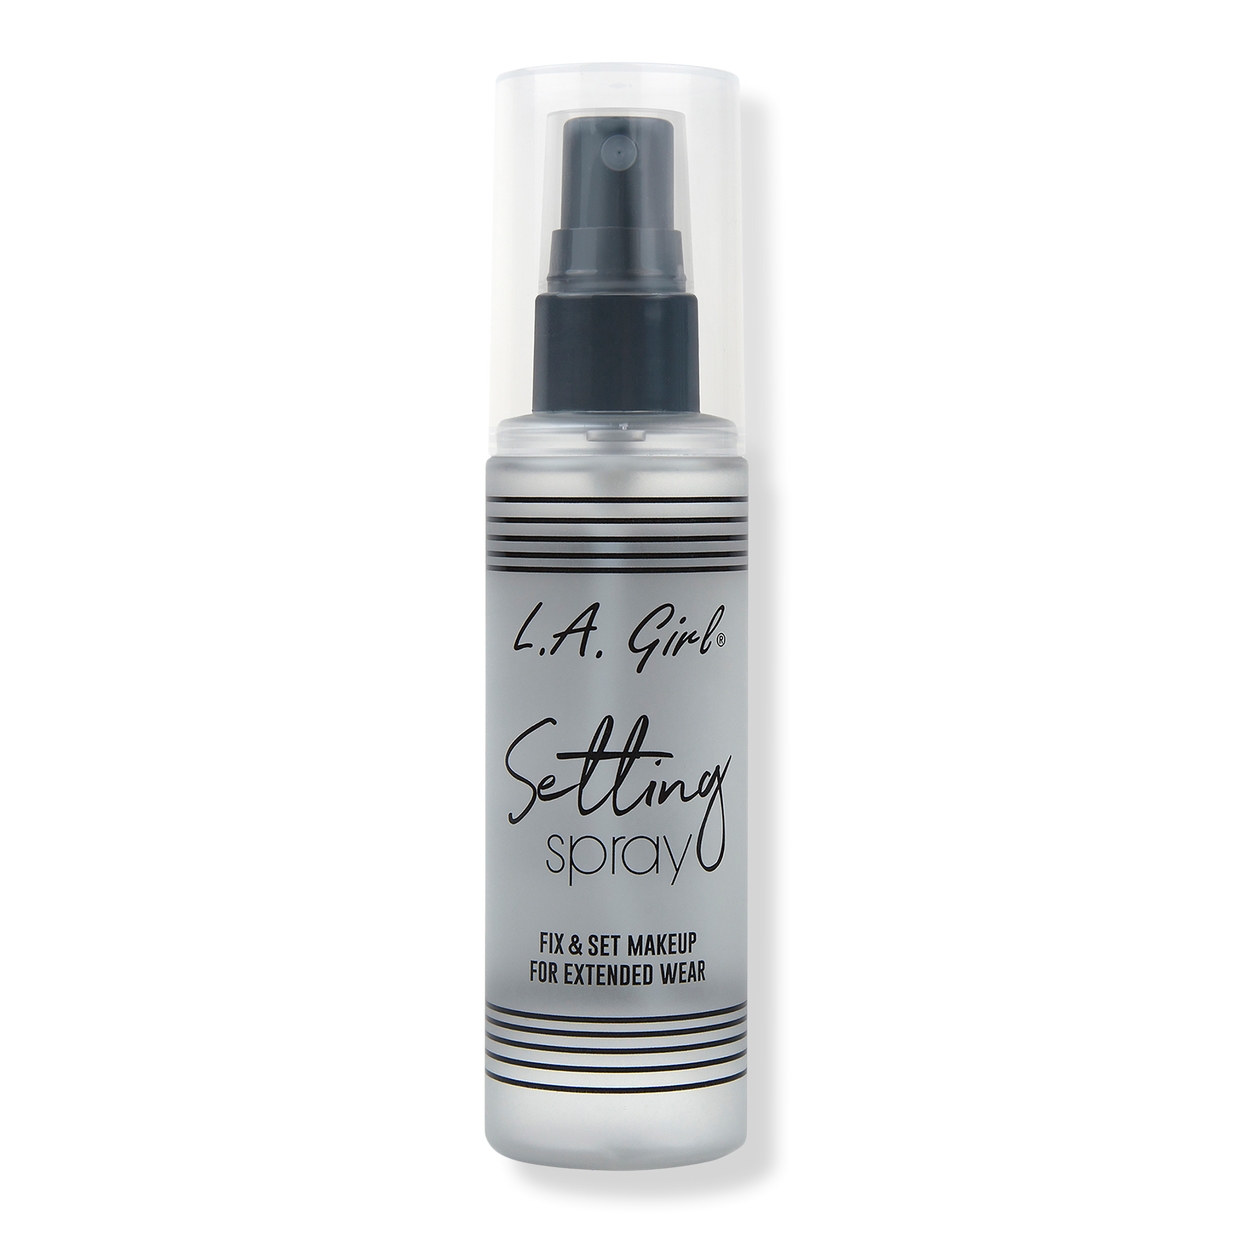 Up for Ever Mist & Fix Make-Up Setting Spray 1.01 fl. oz. Travel Size